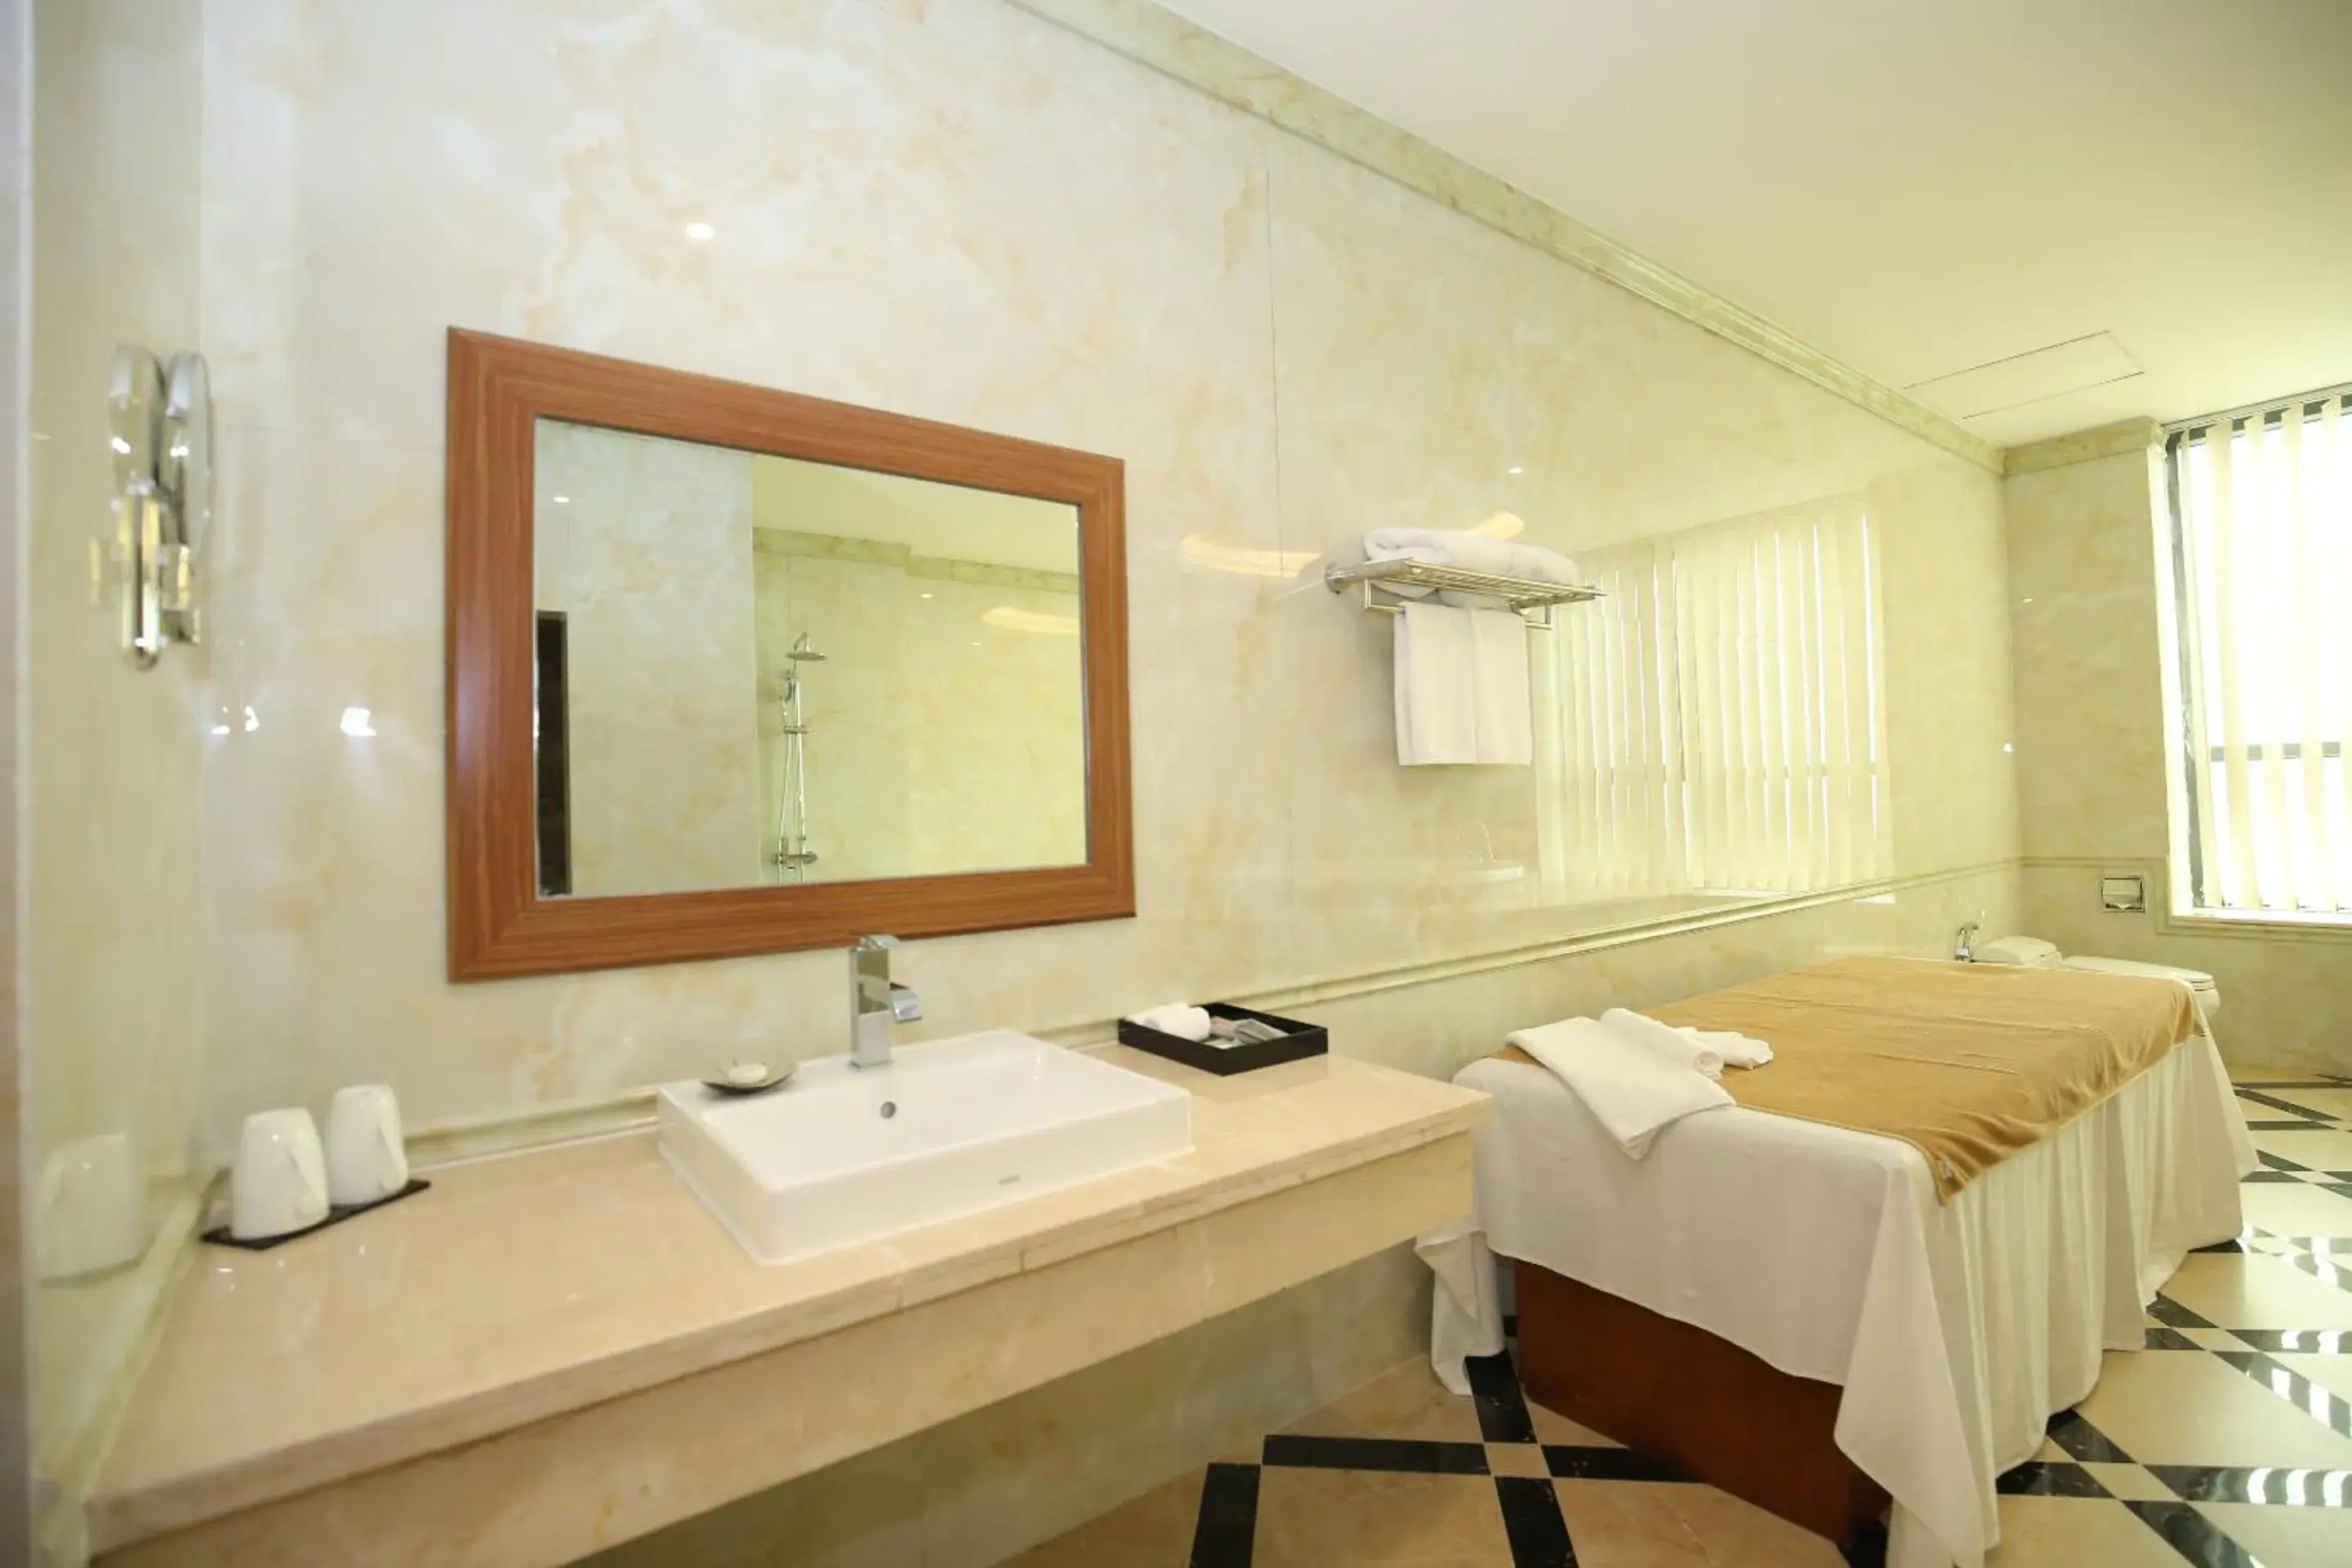 Bathroom in Muong Thanh Thanh Hoa Hotel